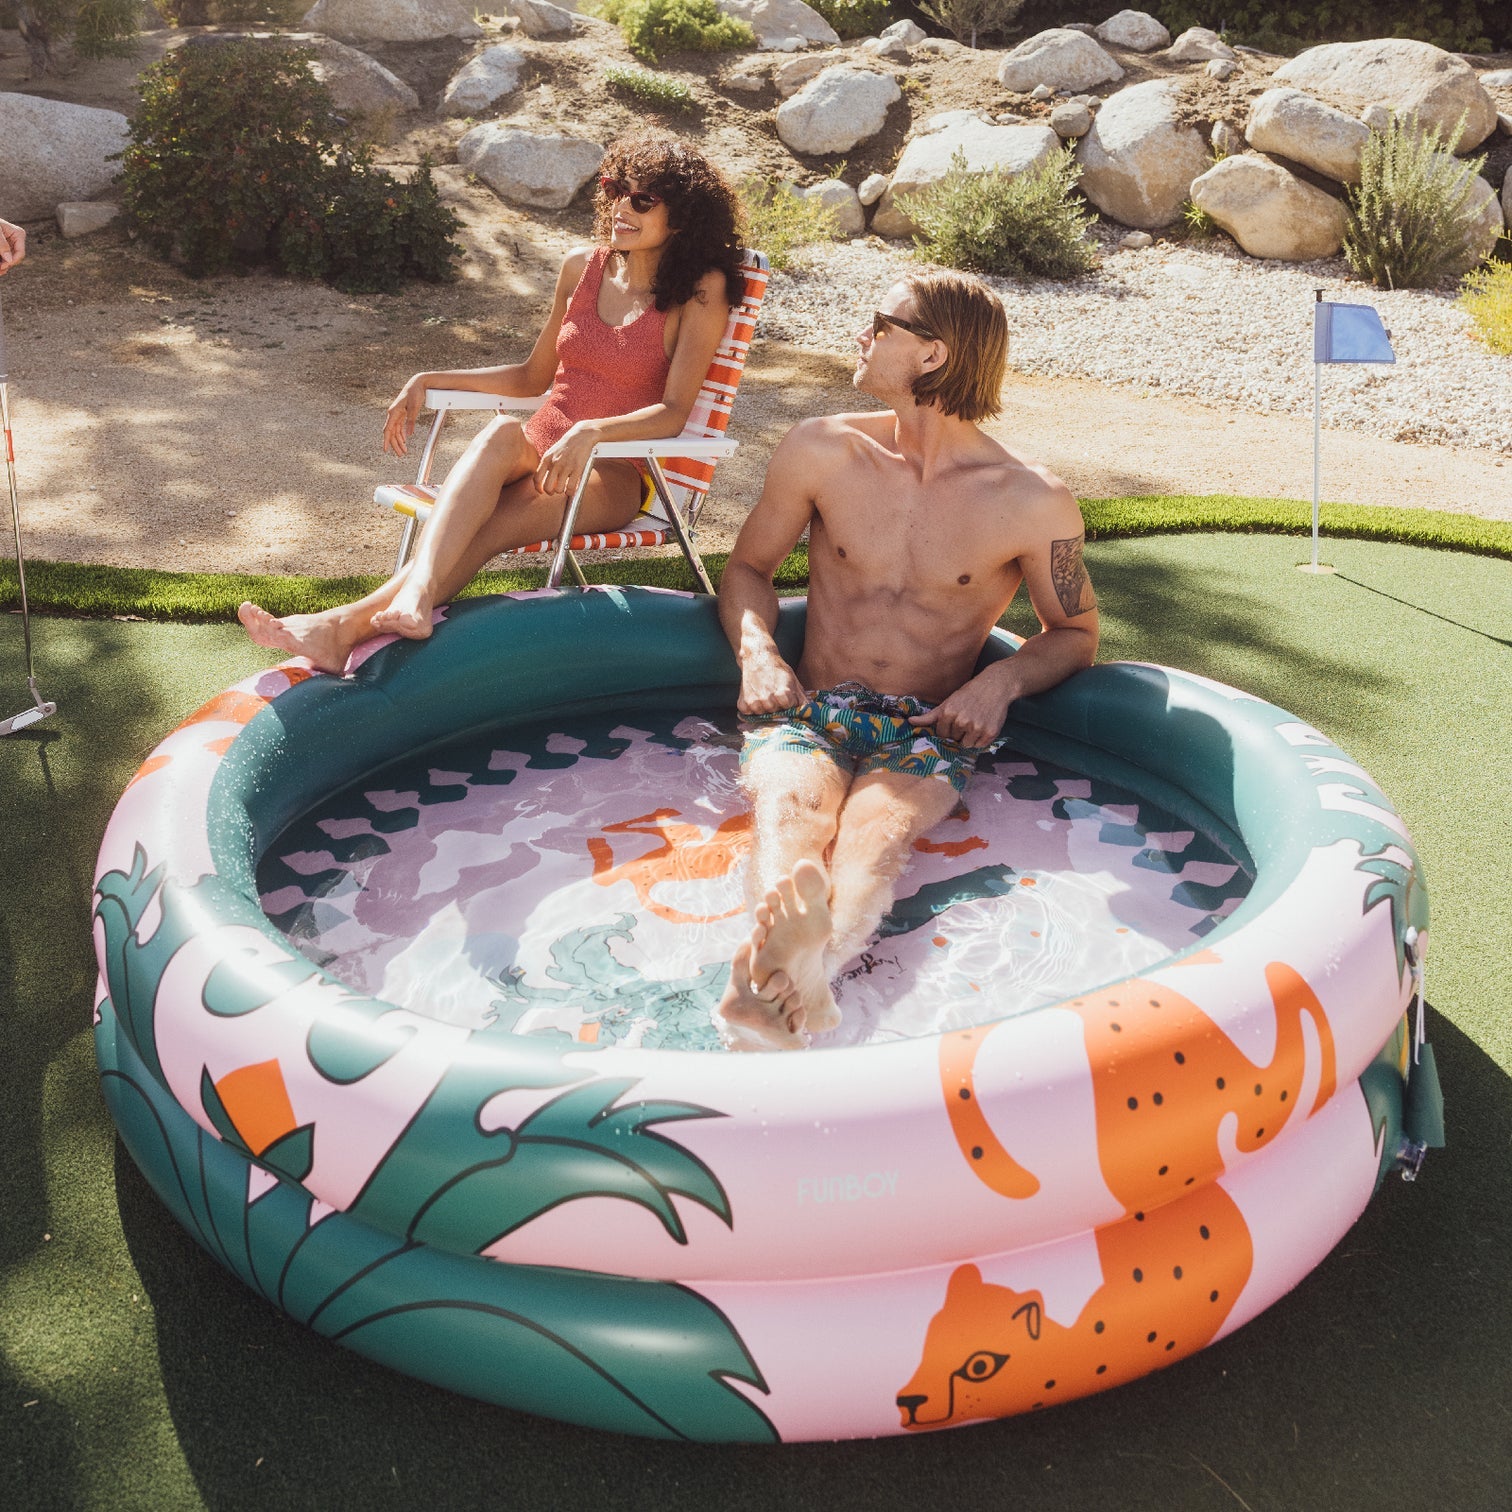 One model chilling inside a kiddie pool and another lounging next to it